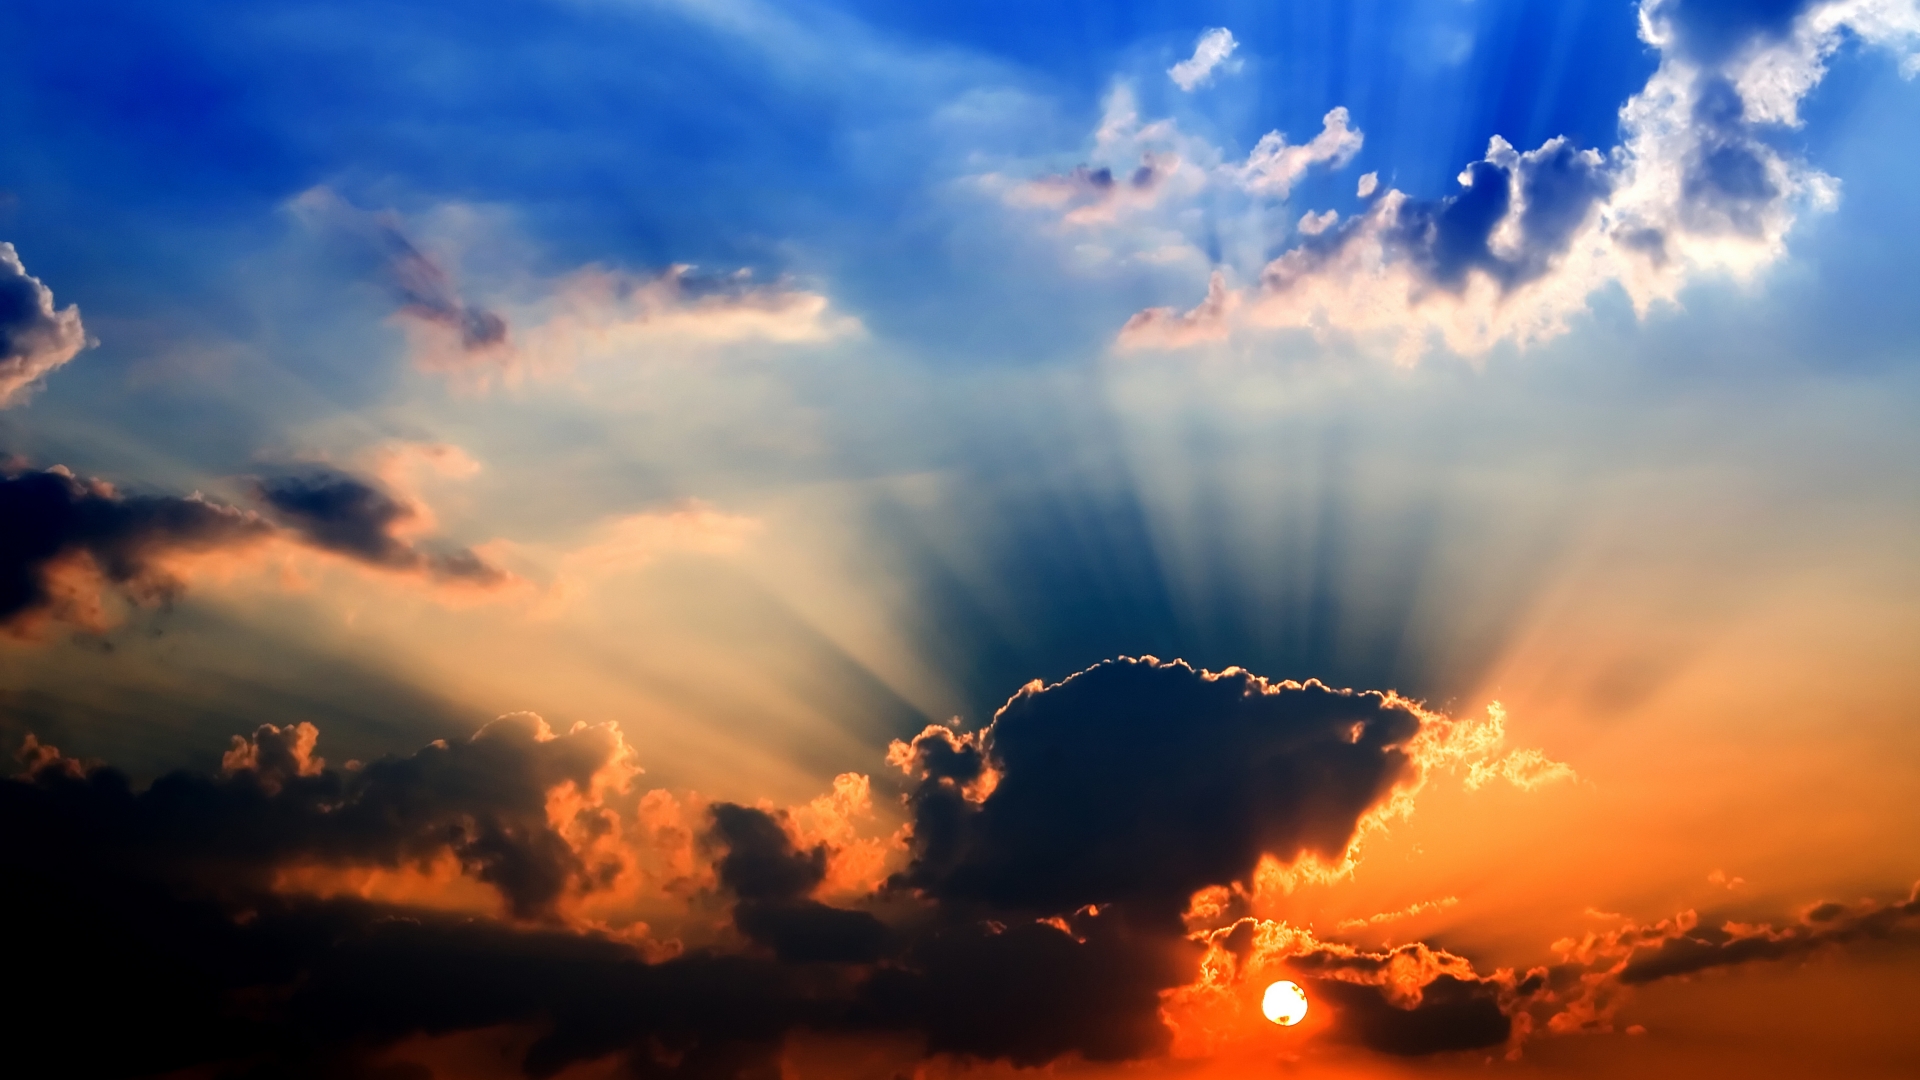 Wallpapers sky landscapes sun rays on the desktop